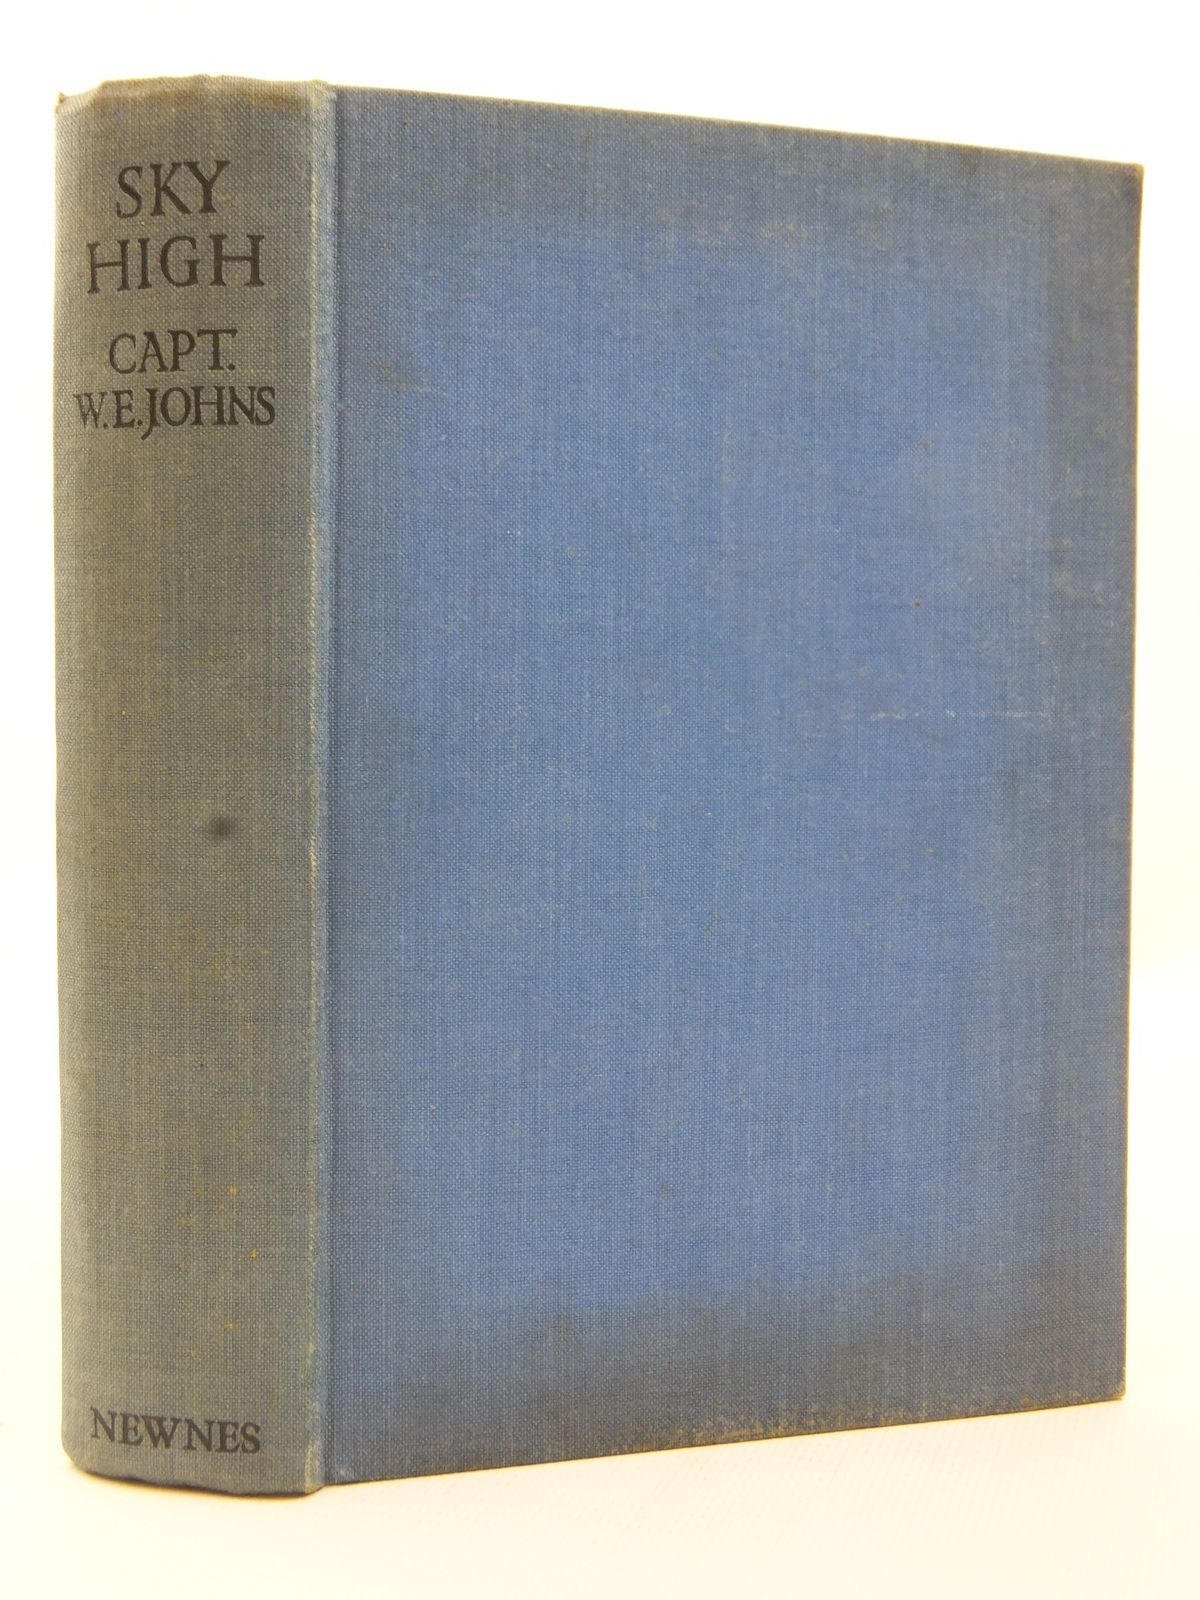 Photo of SKY HIGH written by Johns, W.E. published by Newnes (STOCK CODE: 2123176)  for sale by Stella & Rose's Books